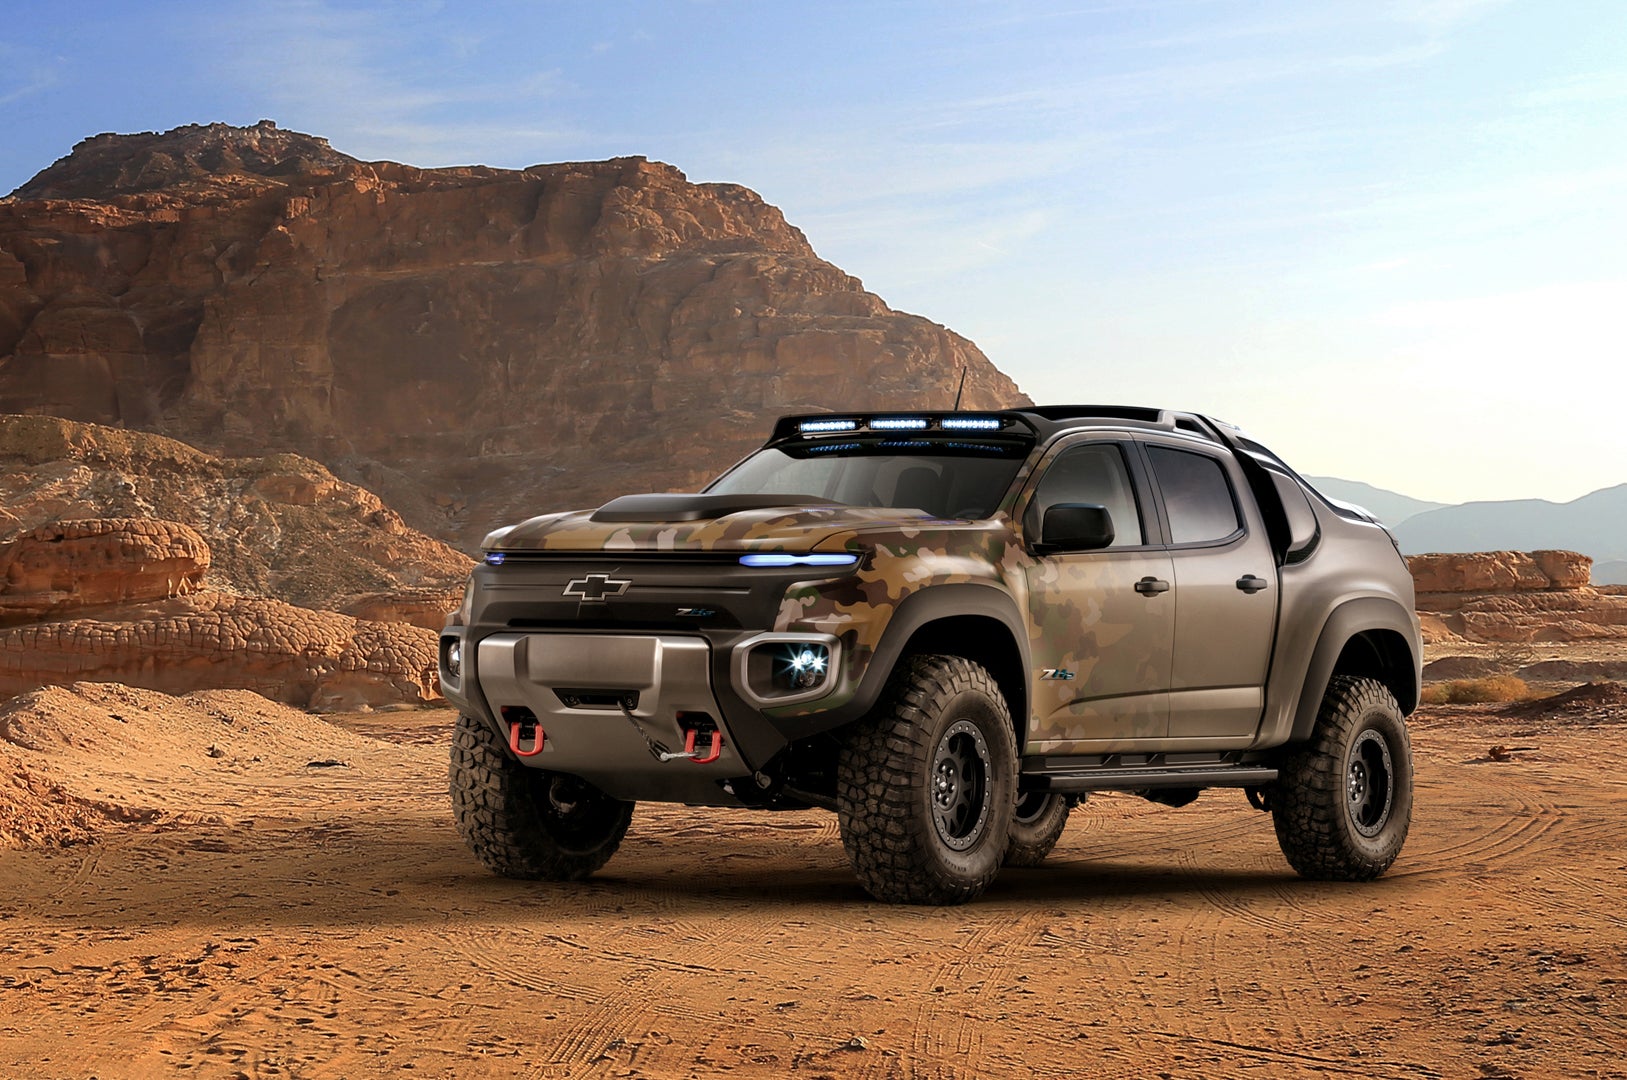 Chevy Might Be Working on a Hydrogen-Powered Pickup Truck